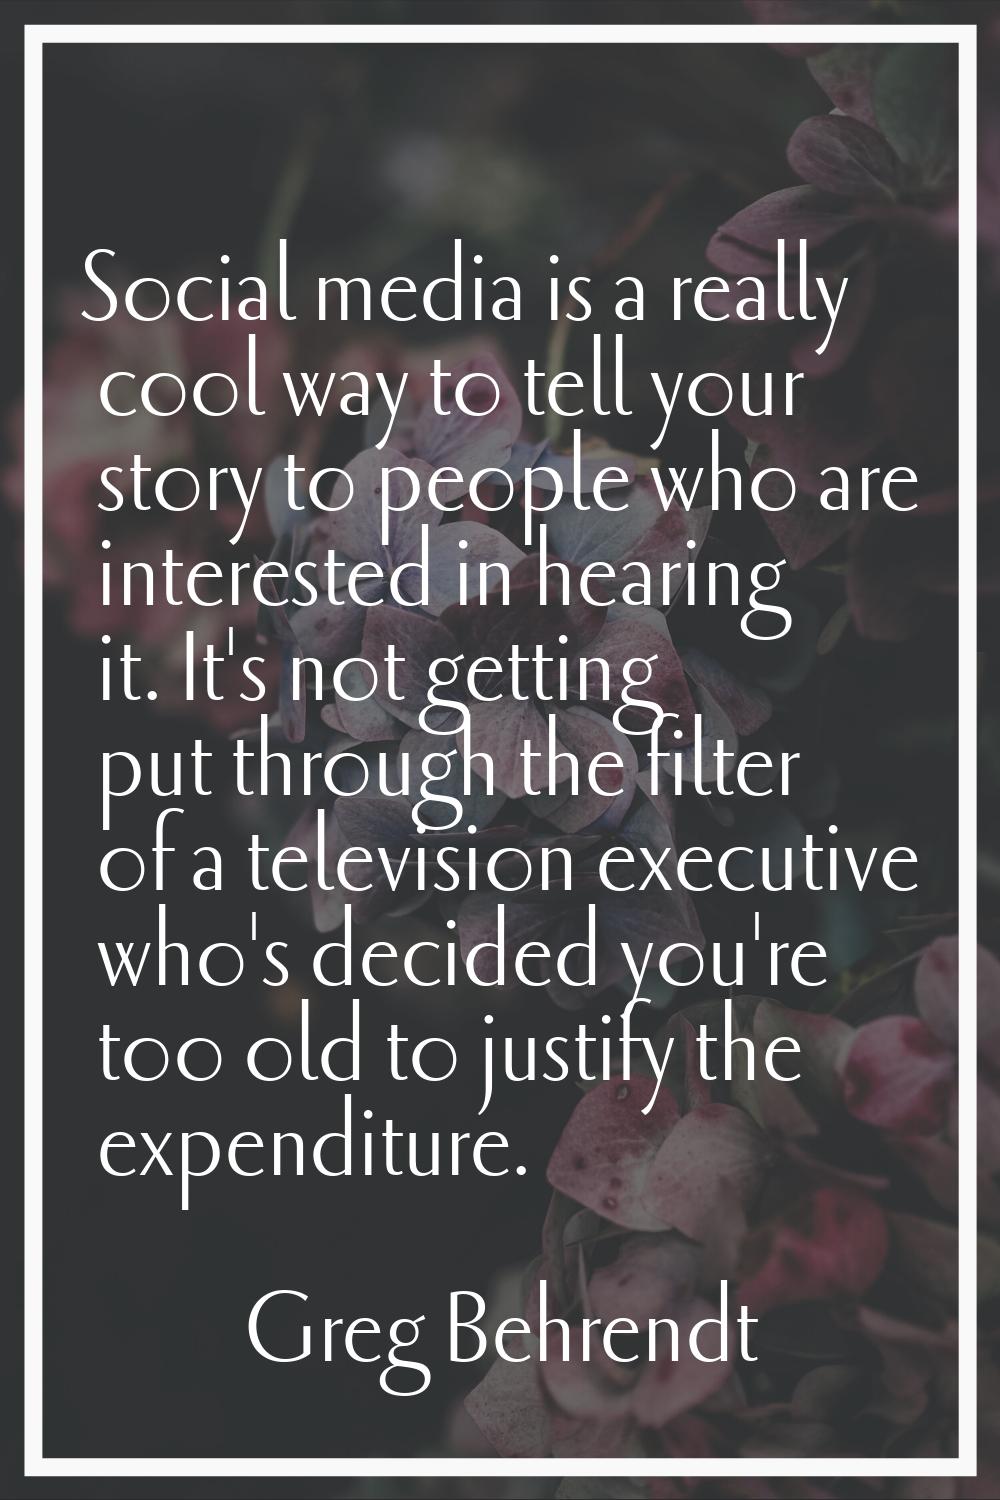 Social media is a really cool way to tell your story to people who are interested in hearing it. It